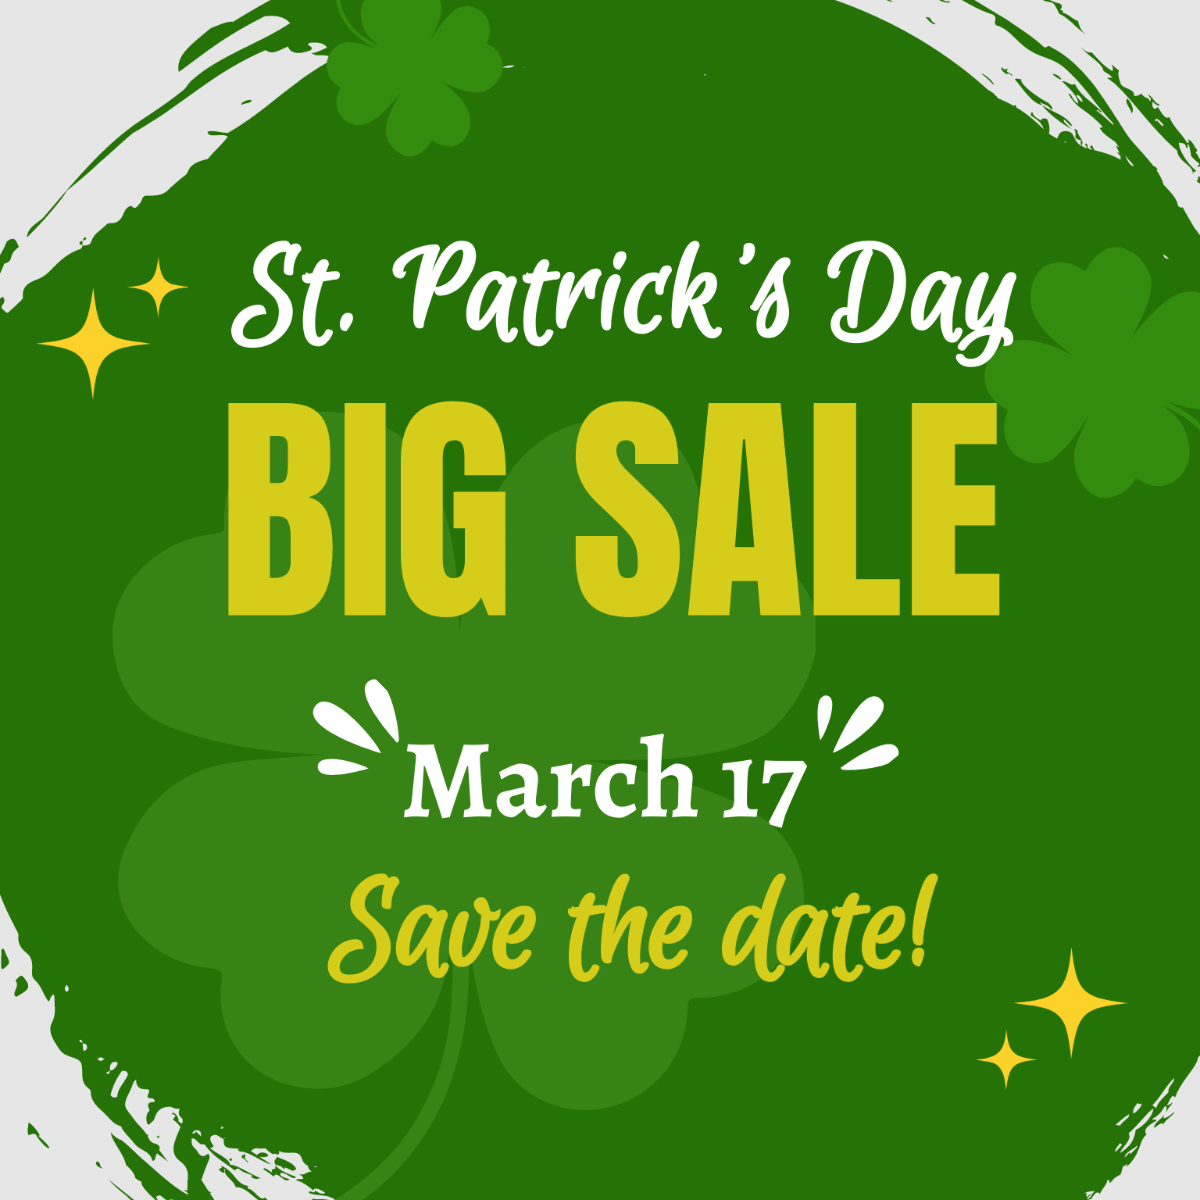 St. Patrick's Day Sale Vector